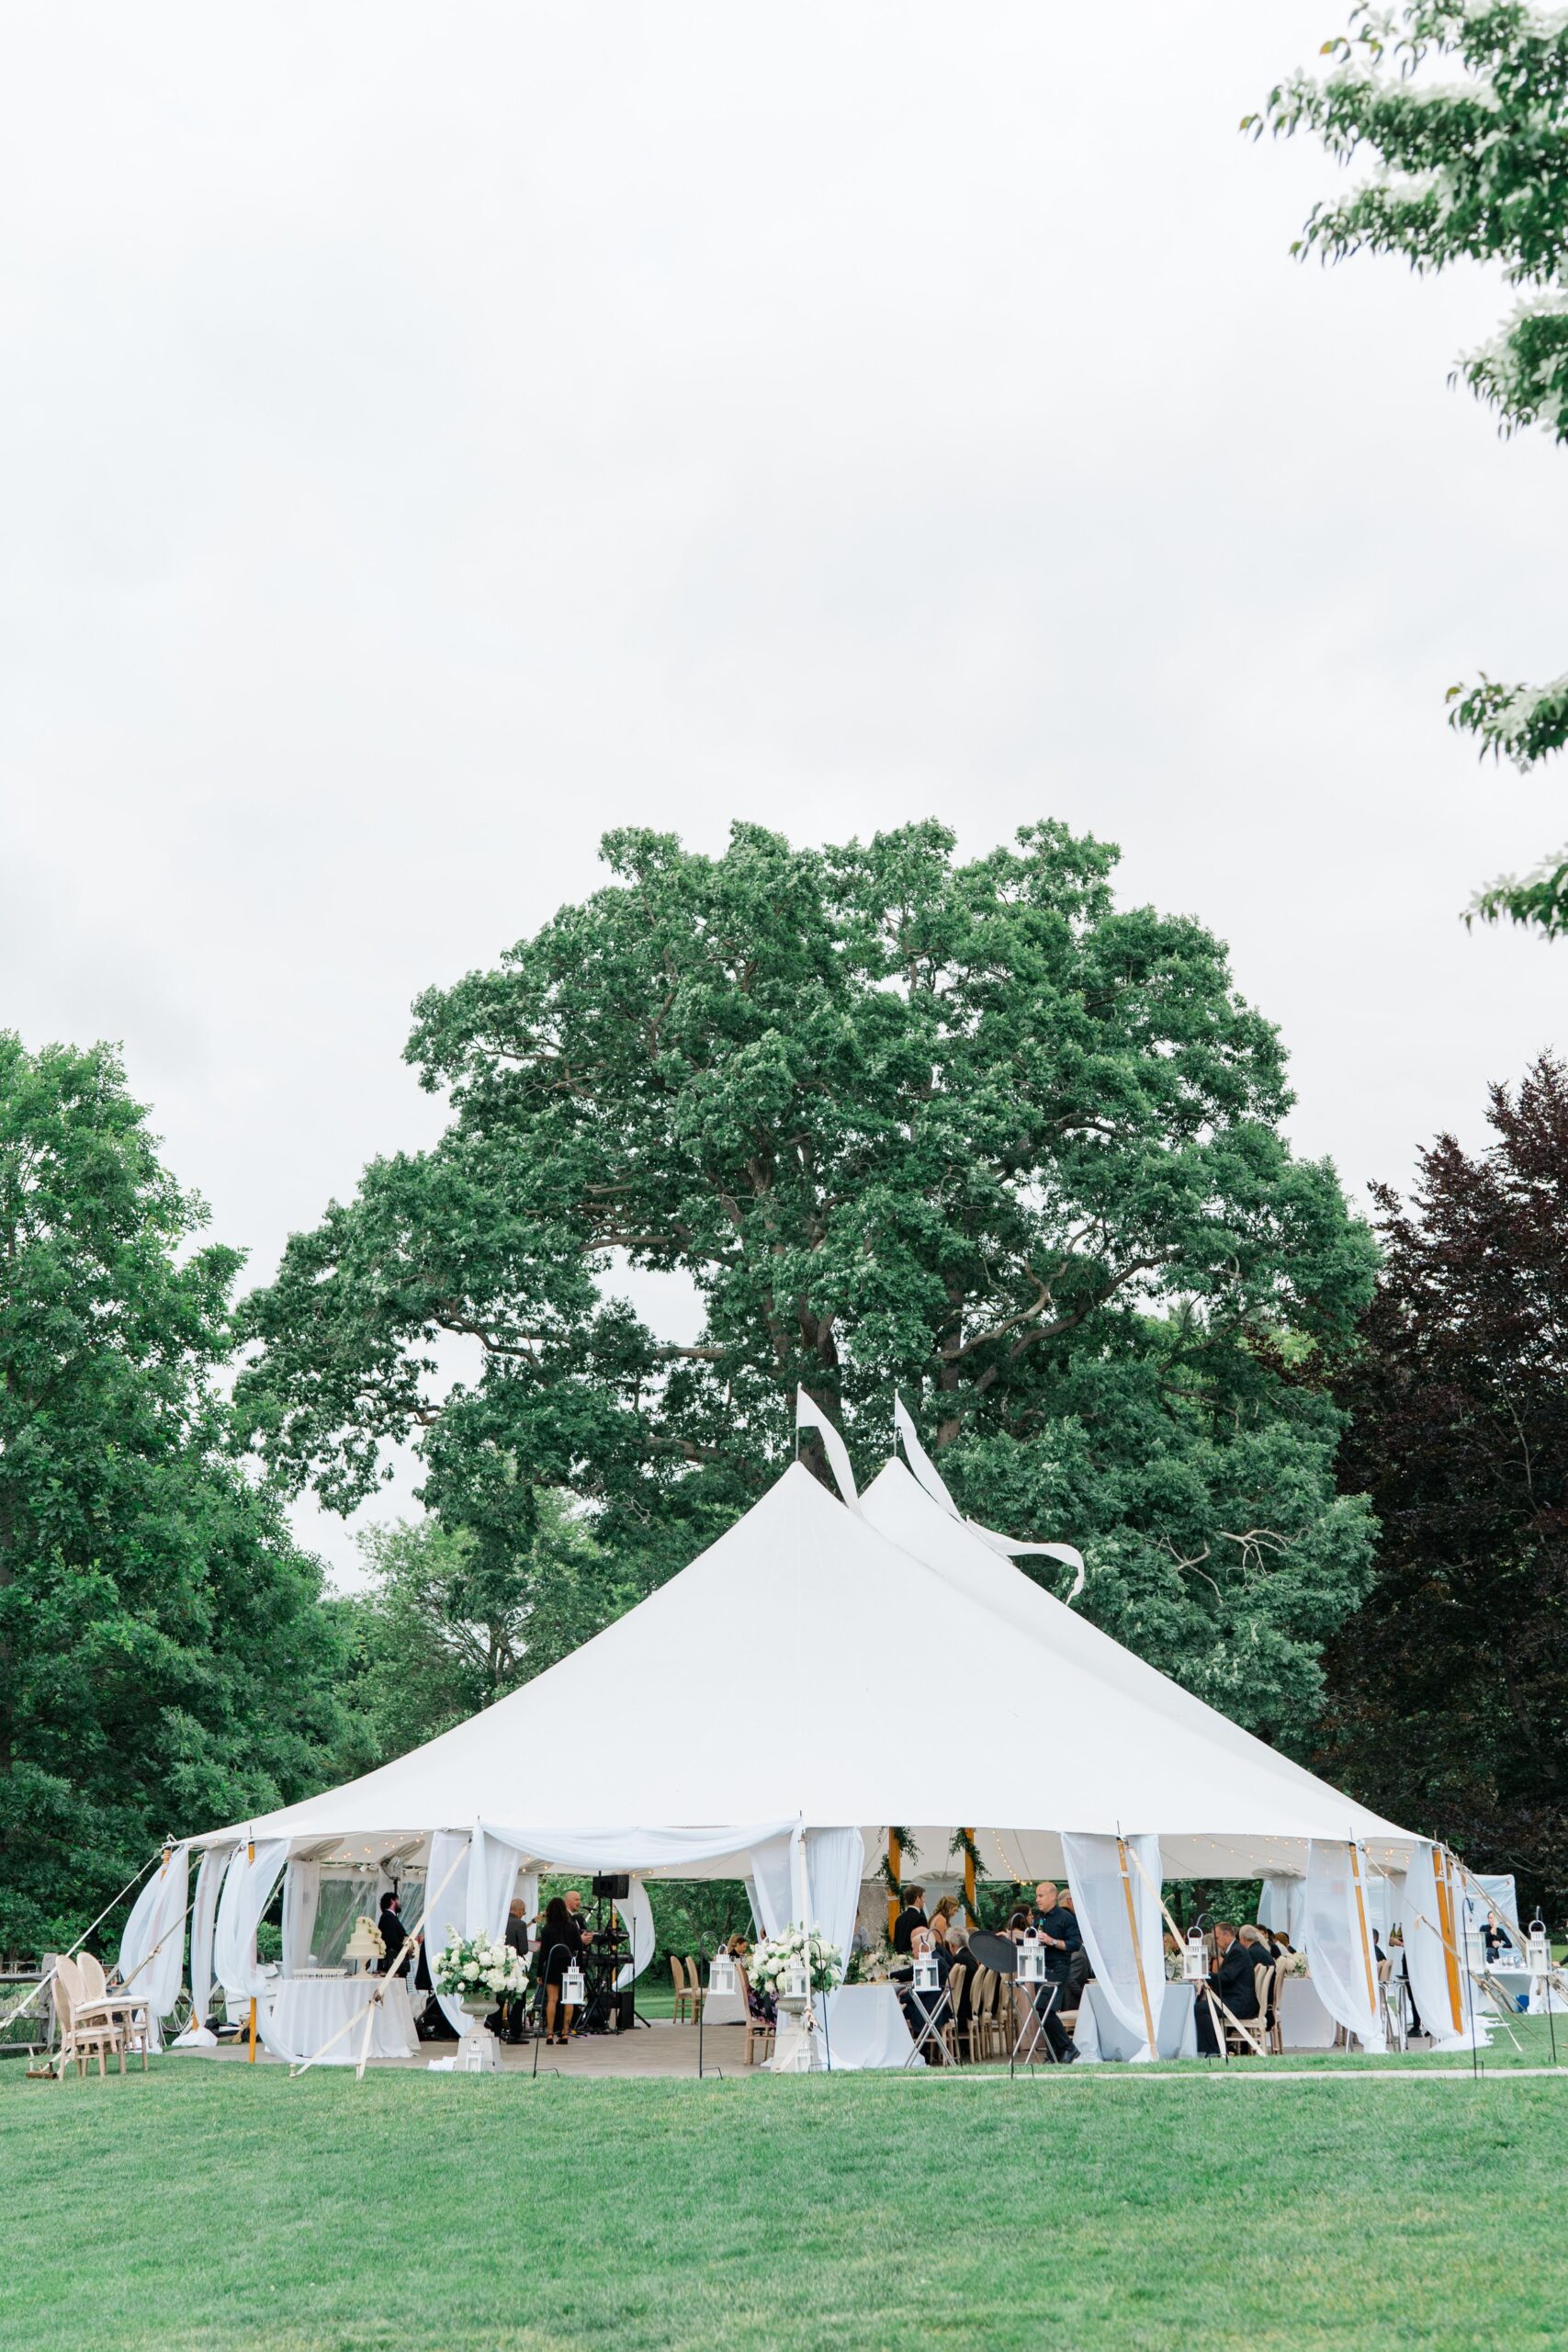 sperry tent topped with flowing white flags nestled amongst lush greenery at Bradley Estate outdoor wedding reception.